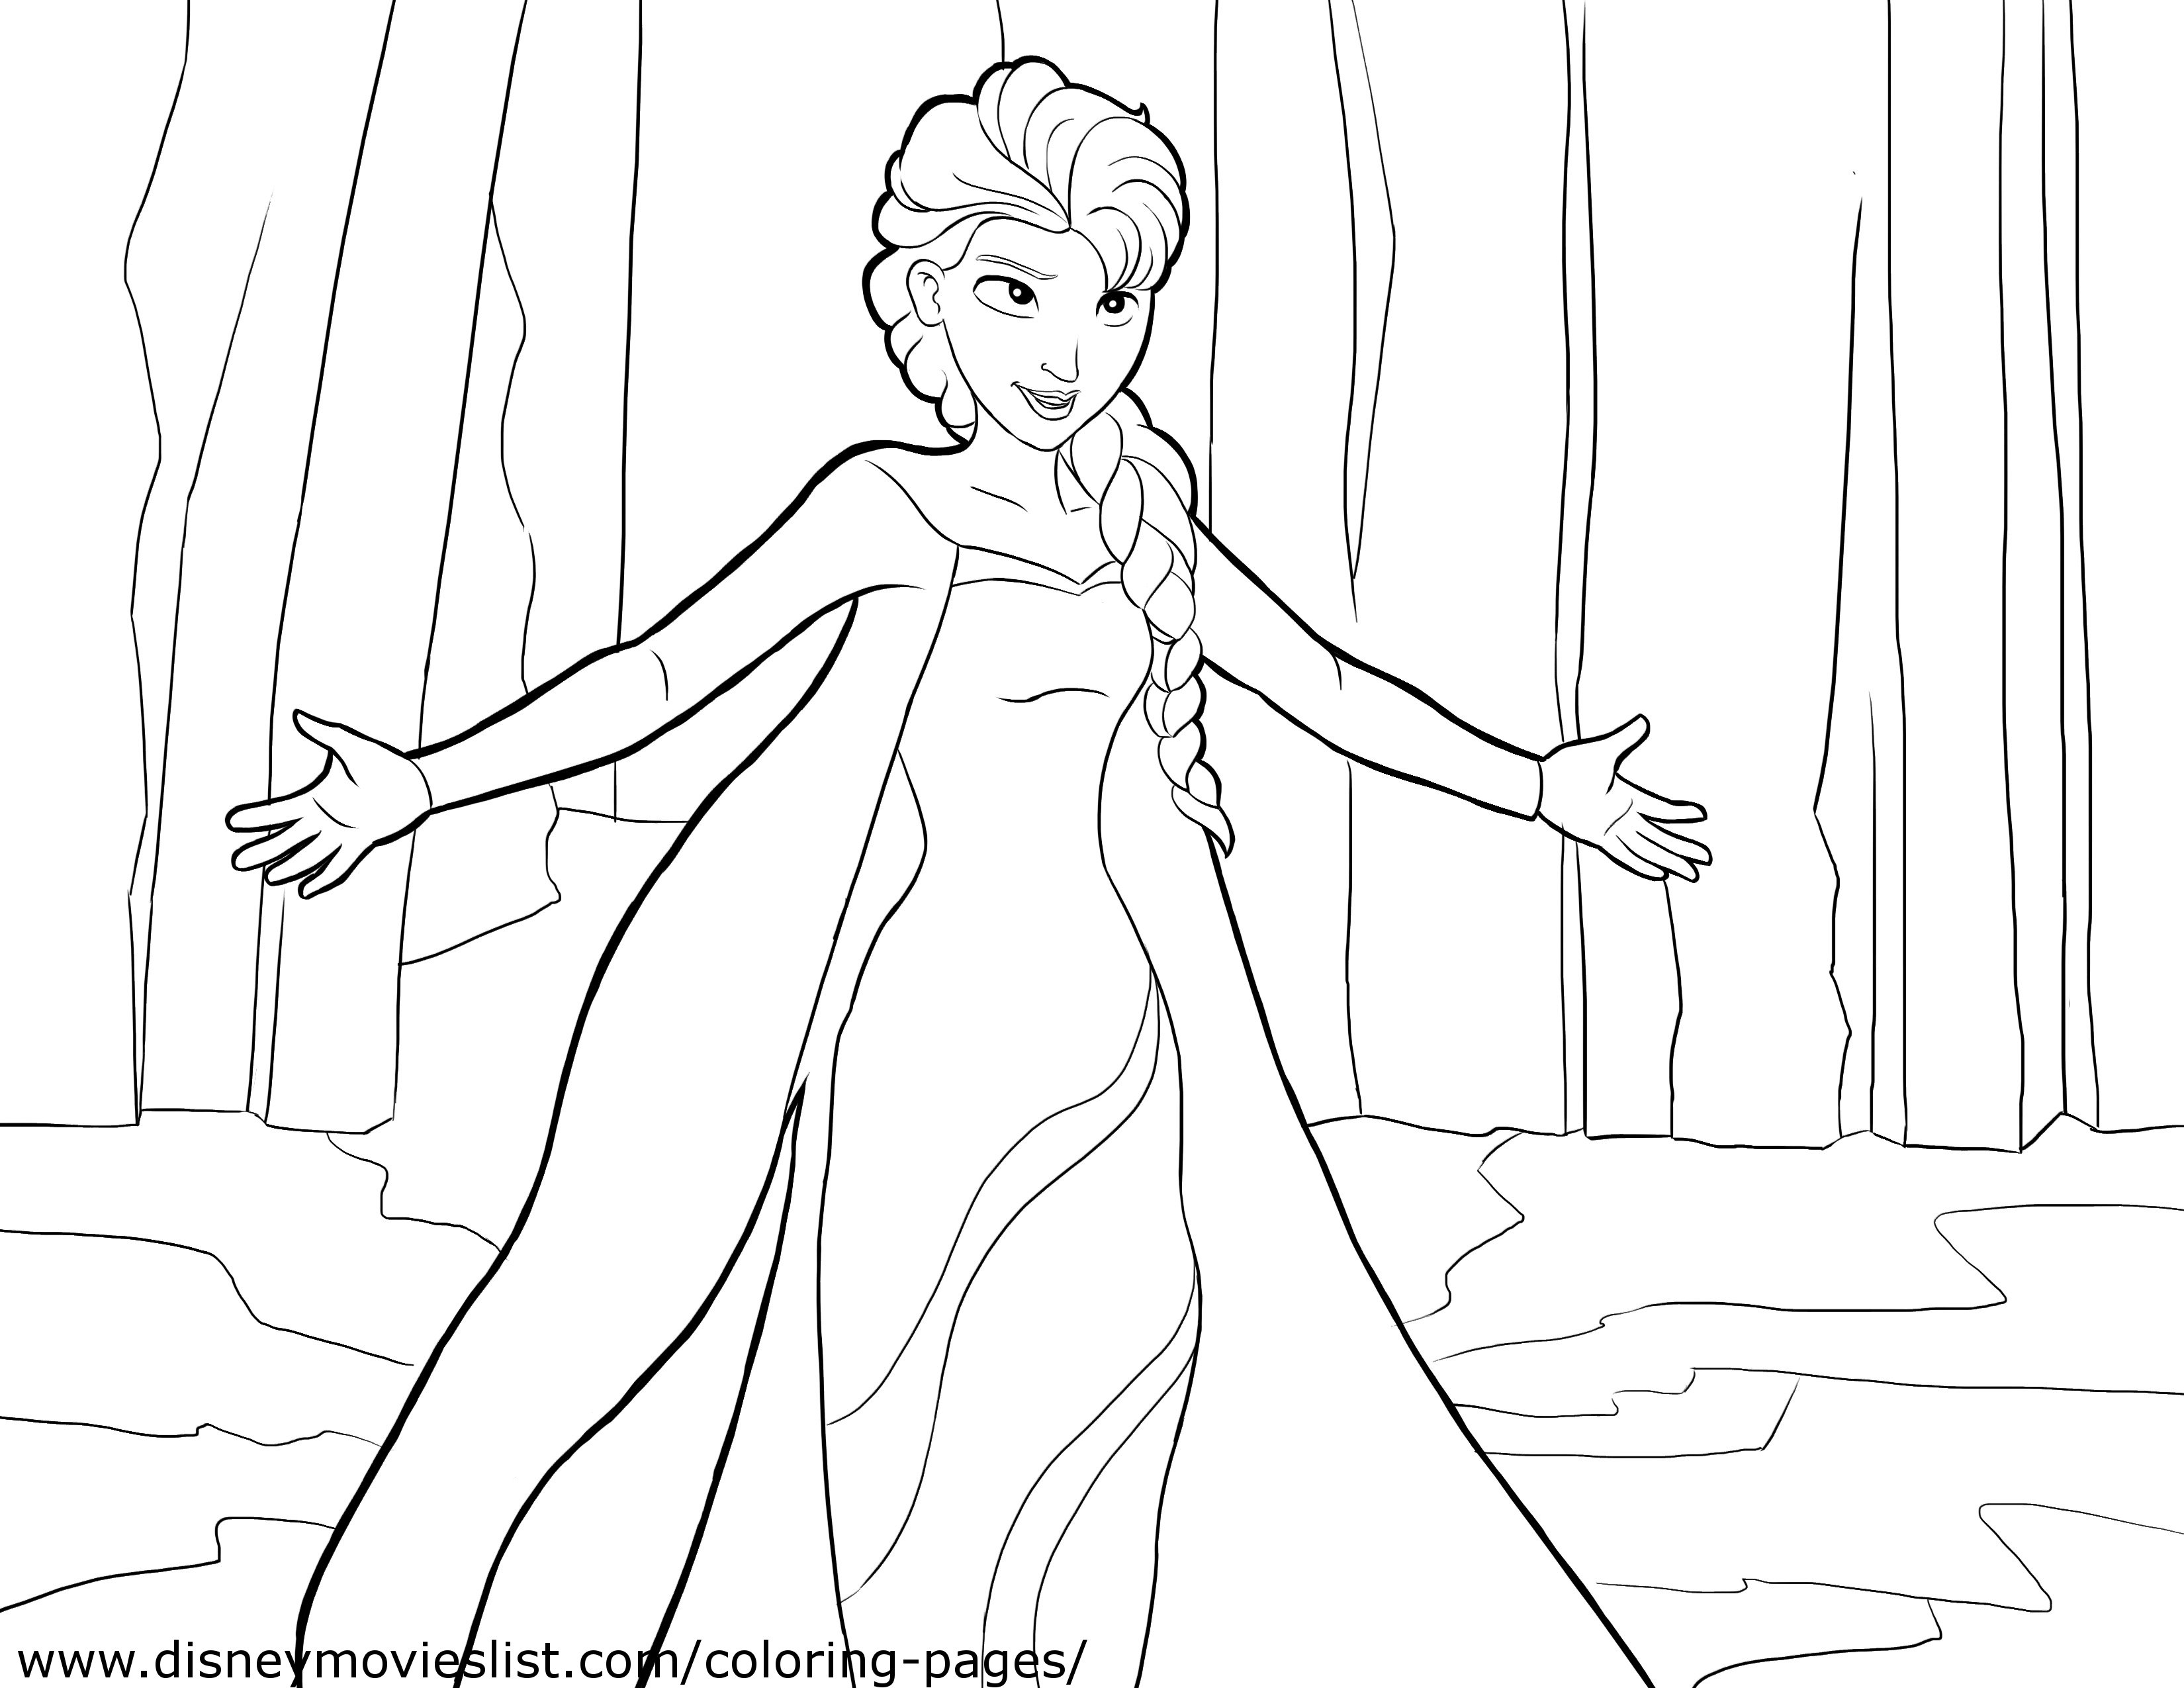 Disney FROZEN Coloring Pages - Lovebugs and Postcards